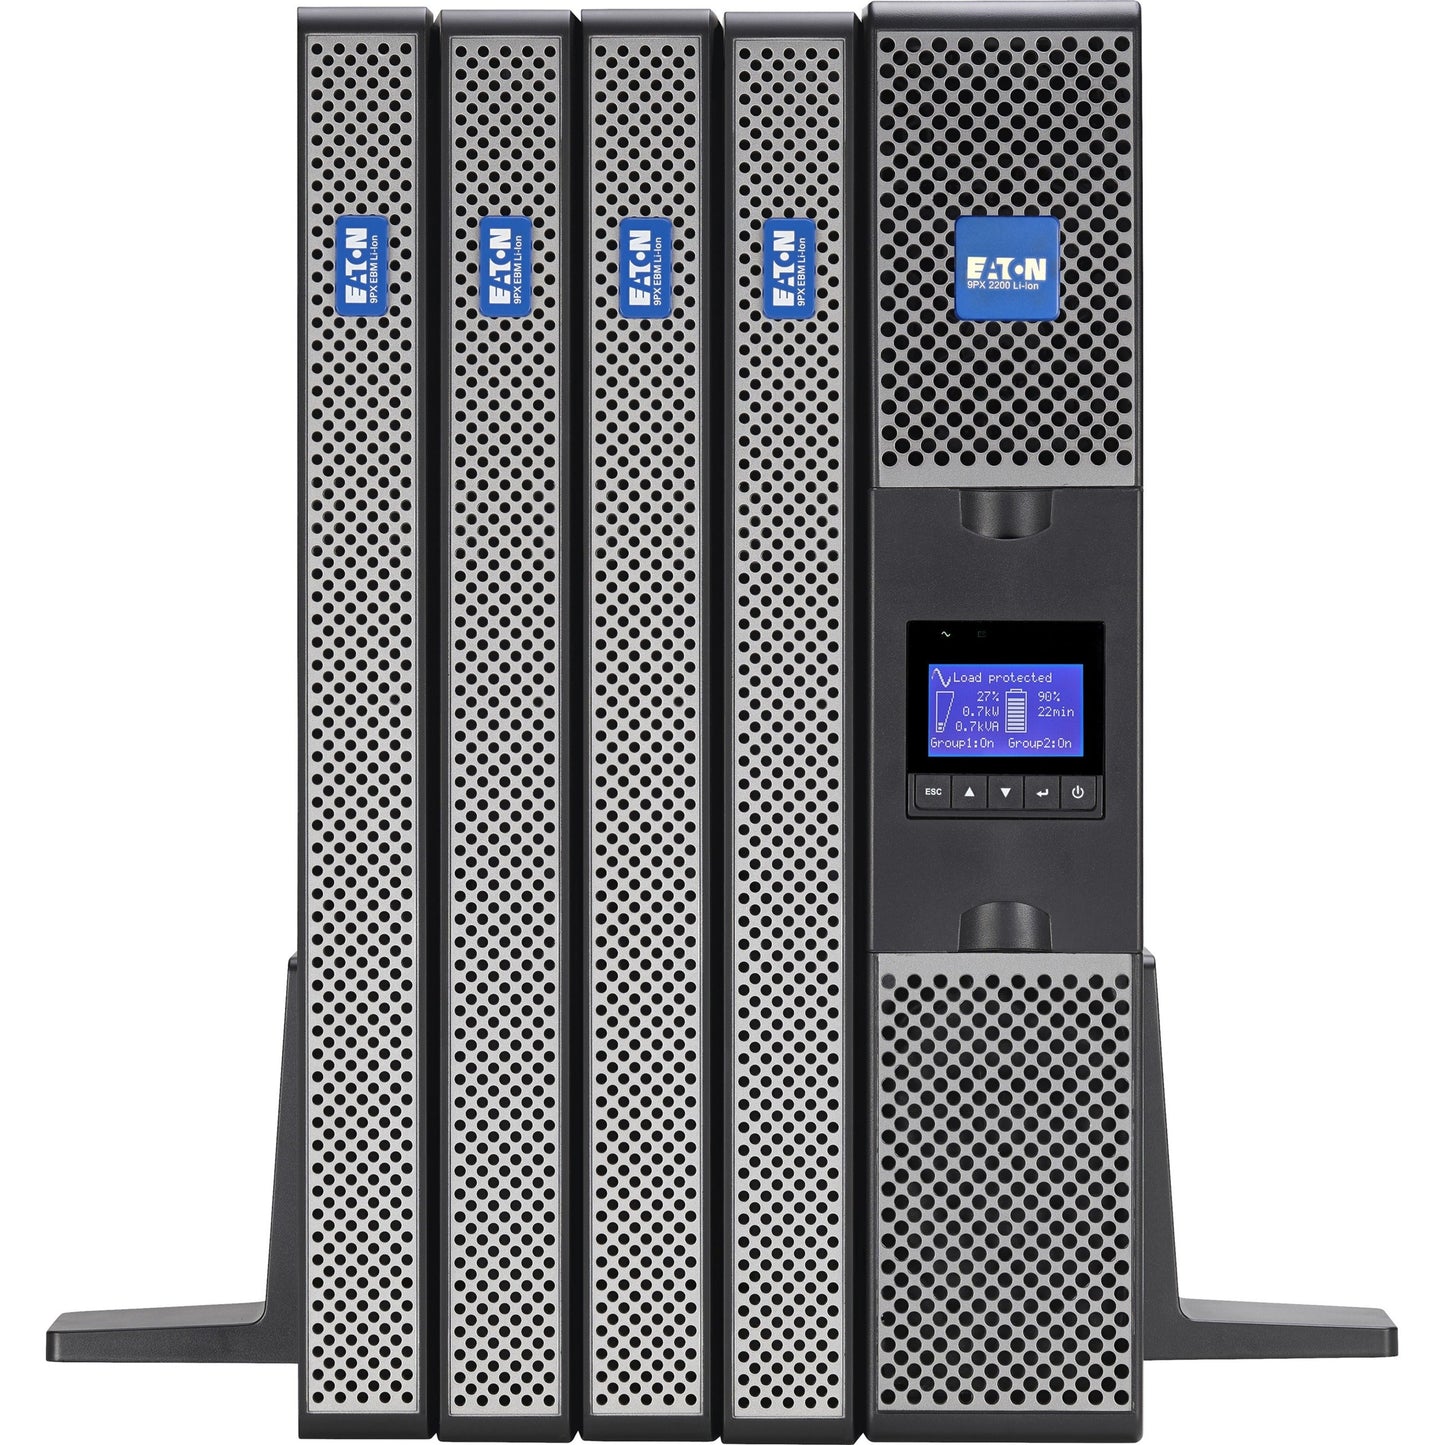 Eaton 9PX 2200VA 2000W 208V Online Double-Conversion UPS - L6-20P 8 C13 2 C19 Outlets Lithium-ion Battery Cybersecure Network Card Option 2U Rack/Tower